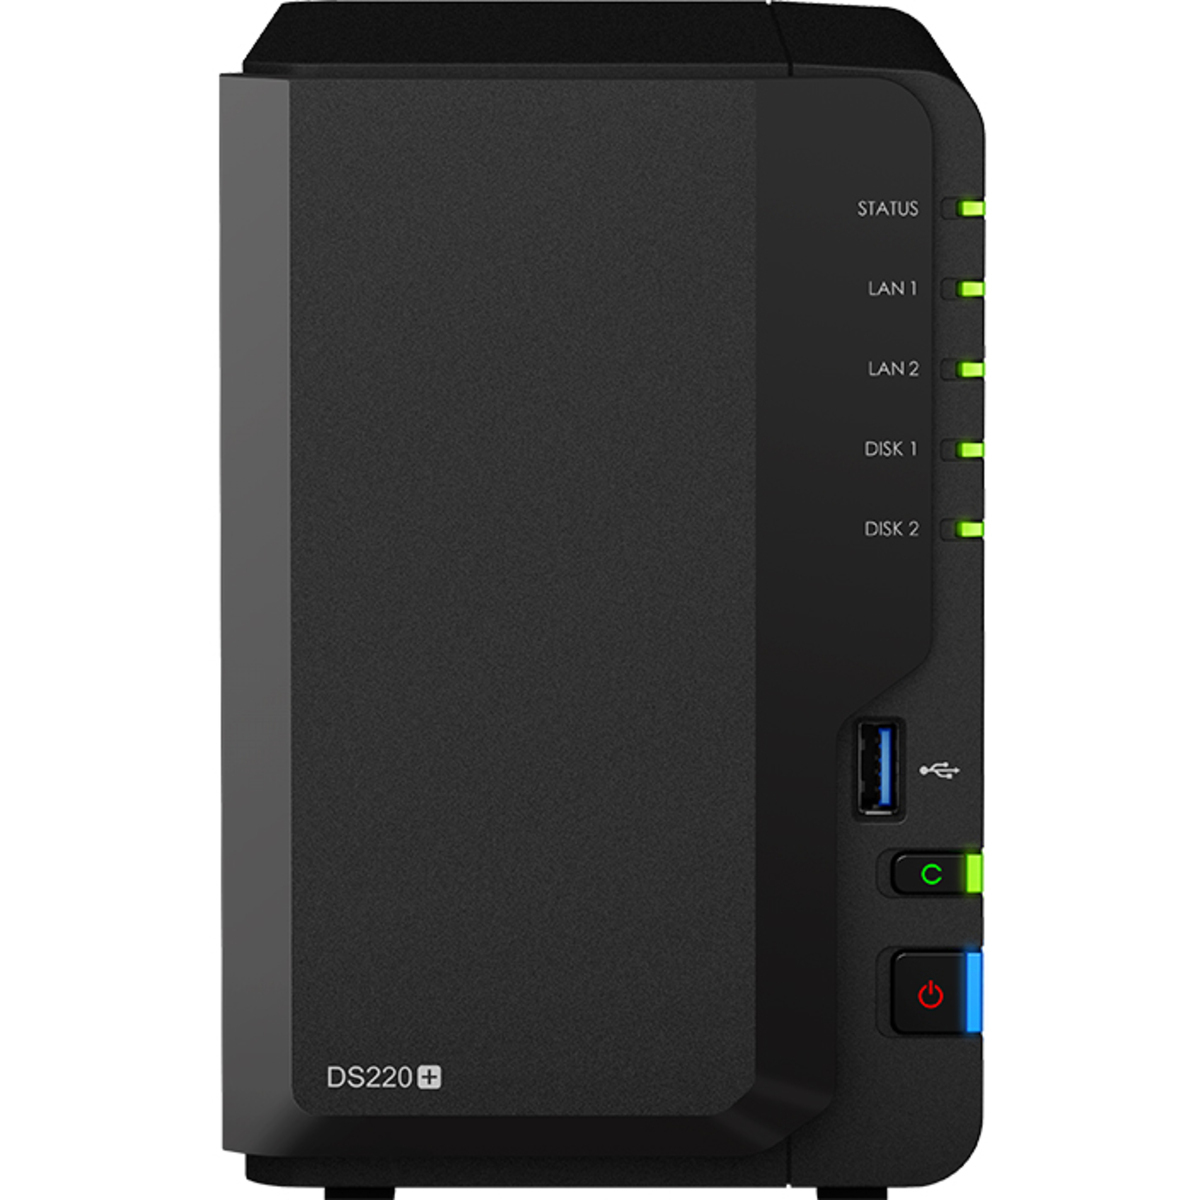 buy $633 Synology DiskStation DS220+ 8tb Desktop NAS - Network Attached Storage Device 2x4000gb Western Digital Blue WD40EZRZ 3.5 5400rpm SATA 6Gb/s HDD CONSUMER Class Drives Installed - Burn-In Tested - FREE RAM UPGRADE - nas headquarters buy network attached storage server device das new raid-5 free shipping usa christmas new year holiday sale DiskStation DS220+